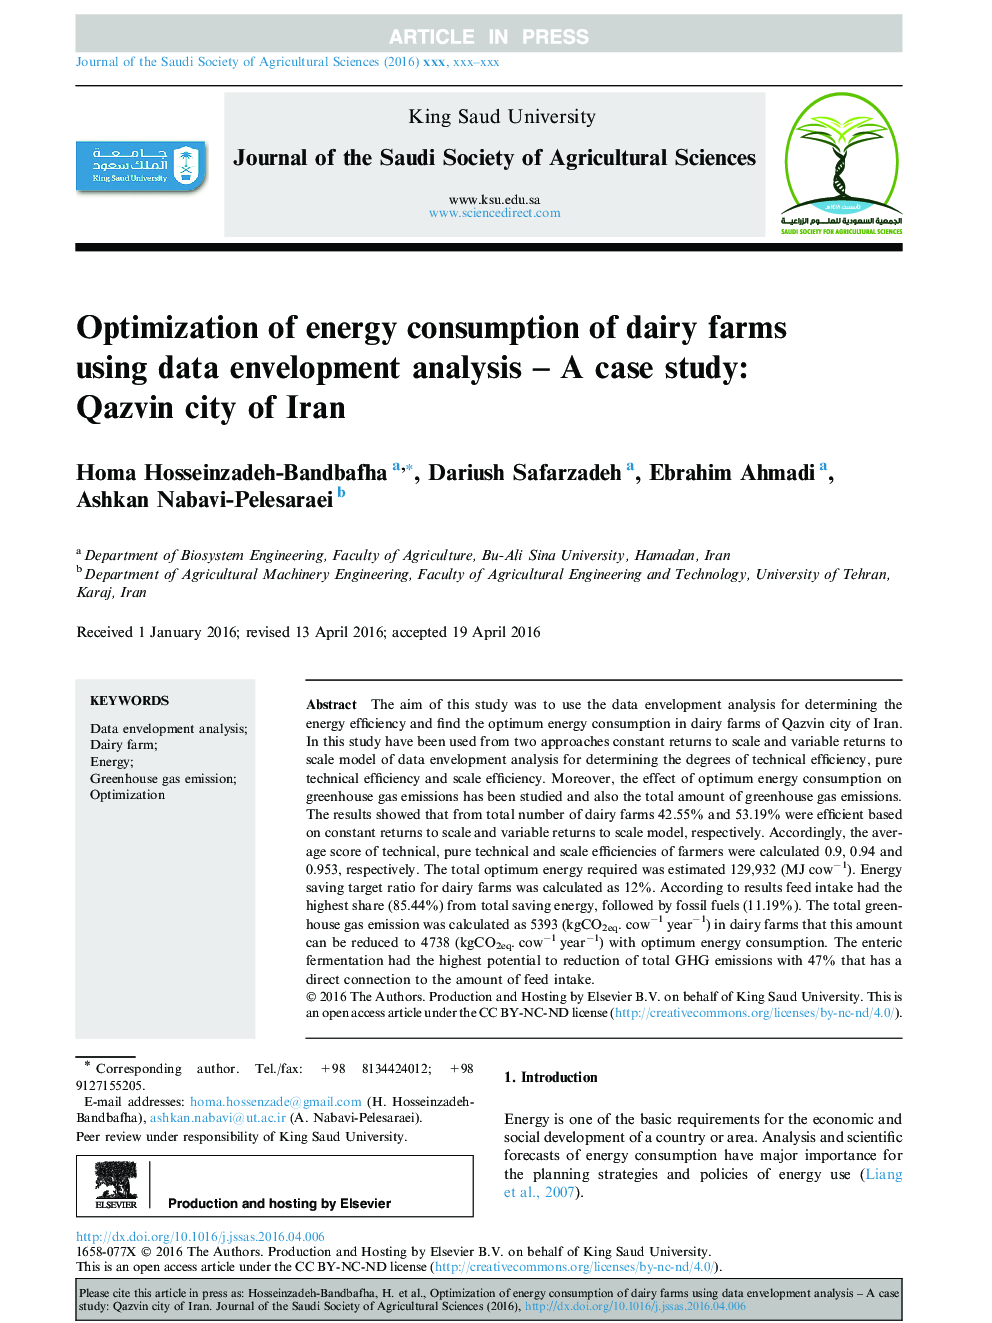 Optimization of energy consumption of dairy farms using data envelopment analysis - A case study: Qazvin city of Iran